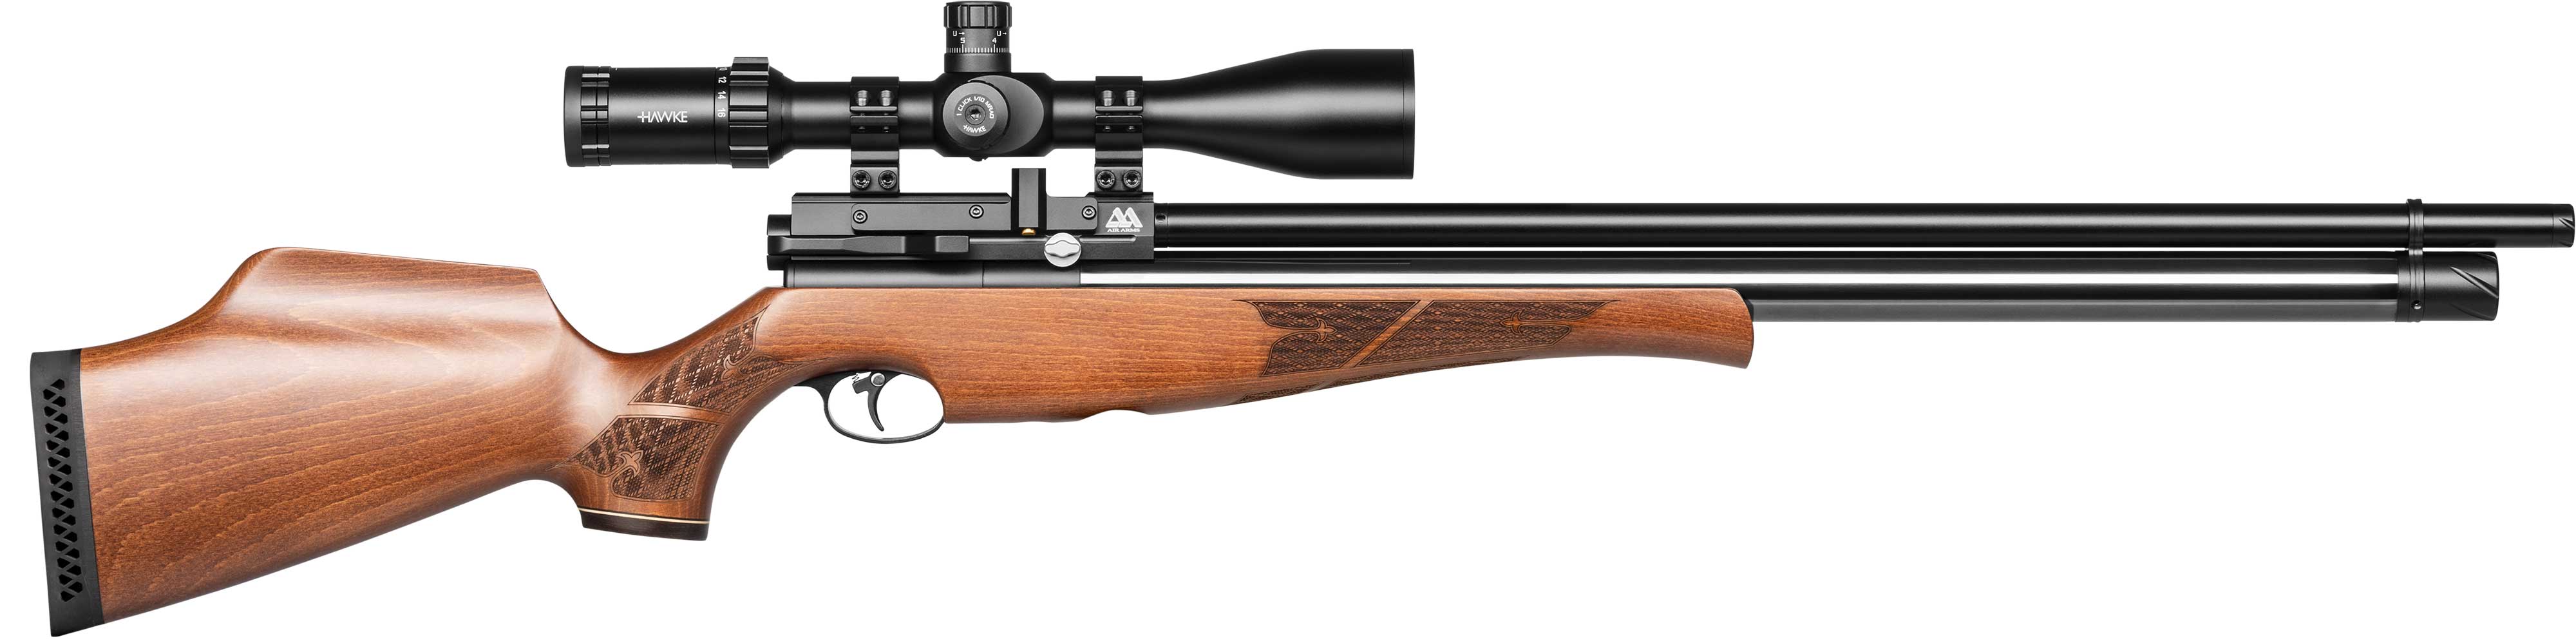 Air Arms S510 Xs Fac Regulated Extra Length 22 Air Rifle Glasgow Angling Centre 5378